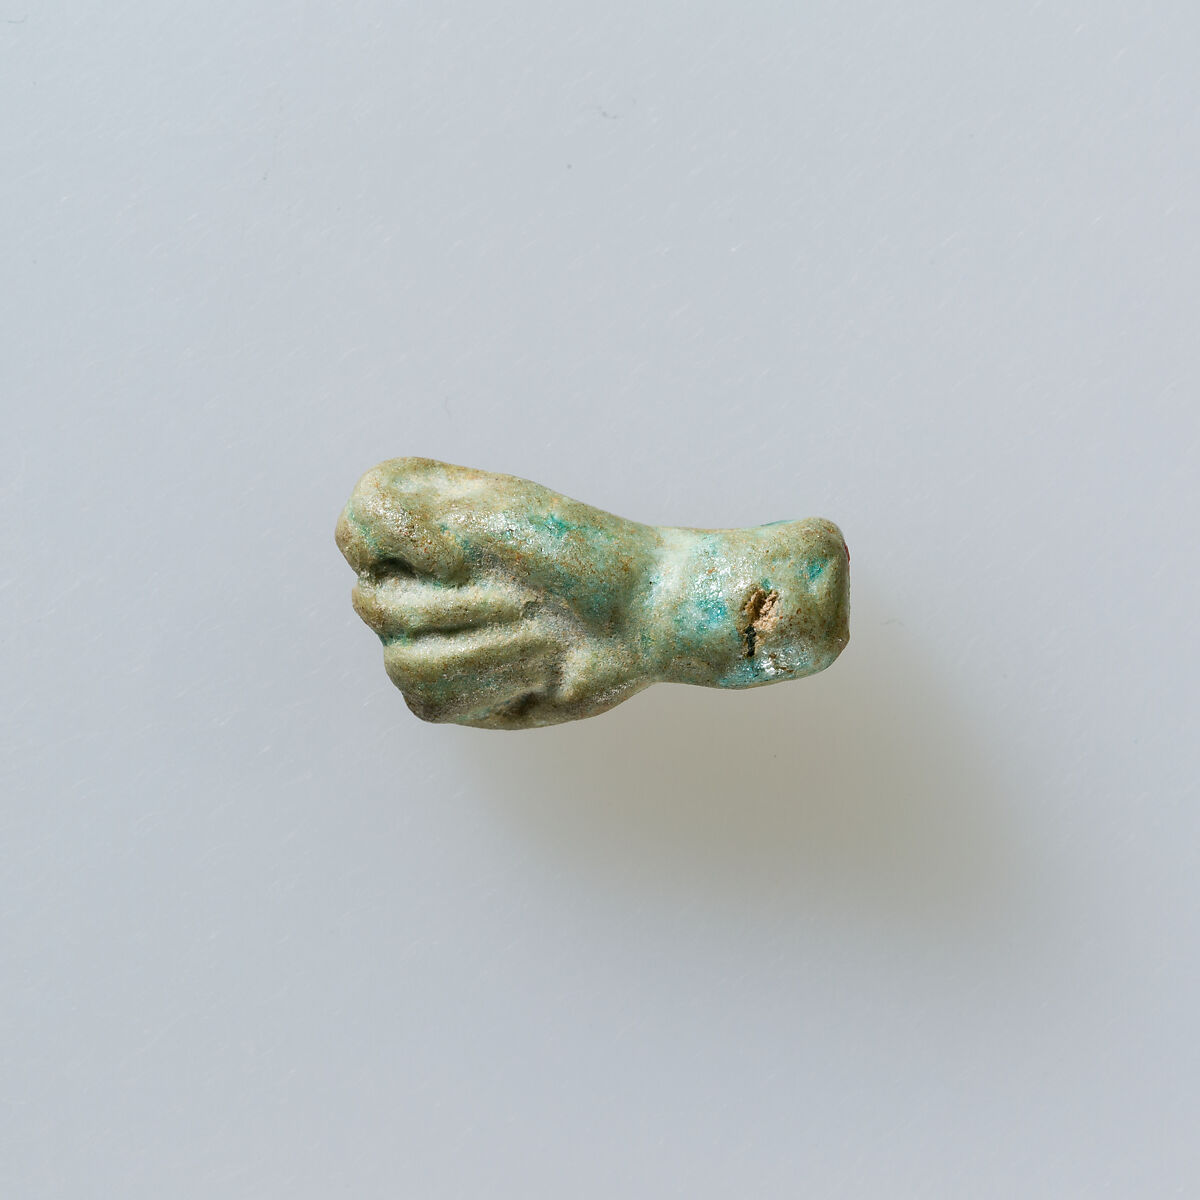 Amulet of fist with thumb thrust between first two fingers, Pale green faience 